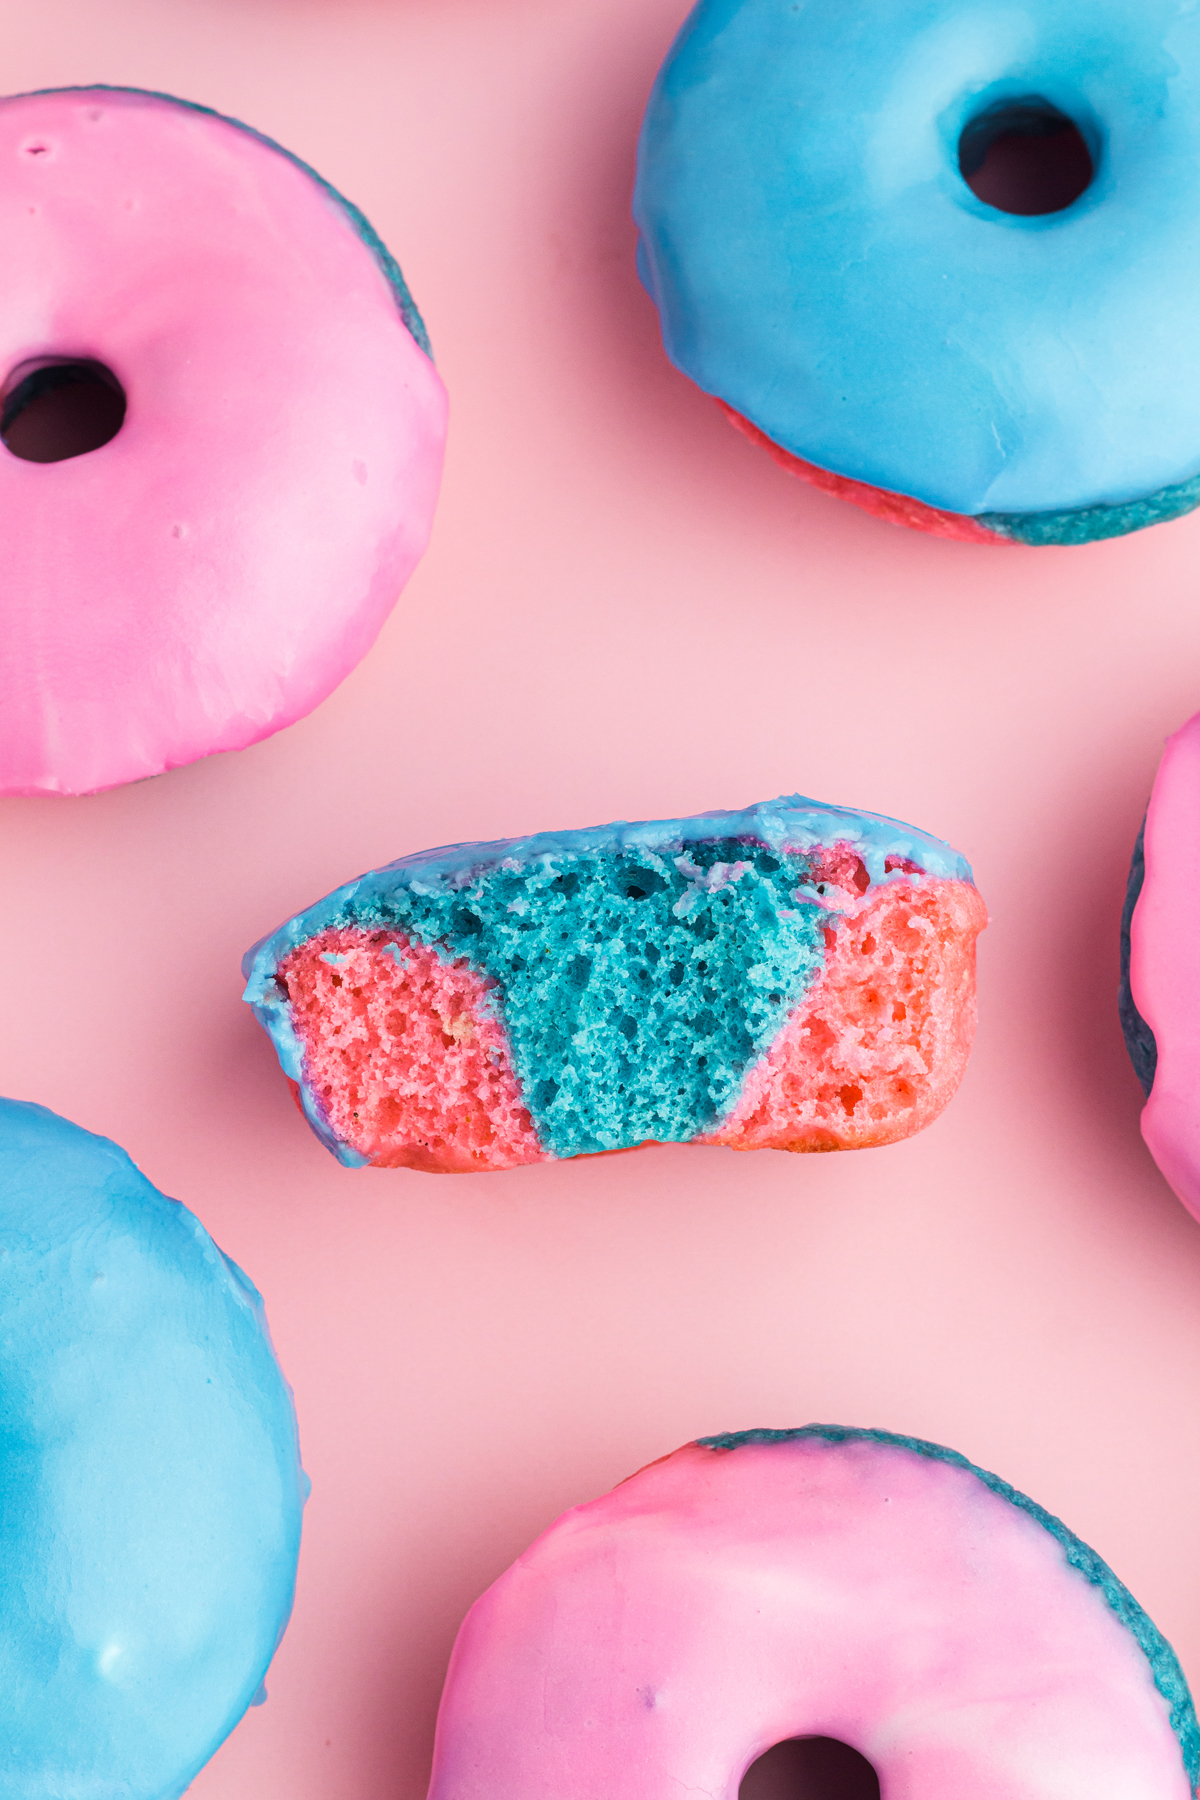 half donut in the middle to see inside, surrouned by 5 other donuts but you can only see parts of the other donuts, pink top left, blue top right, pink middle right, pink bottom right a bit towards the middle, blue bottom left